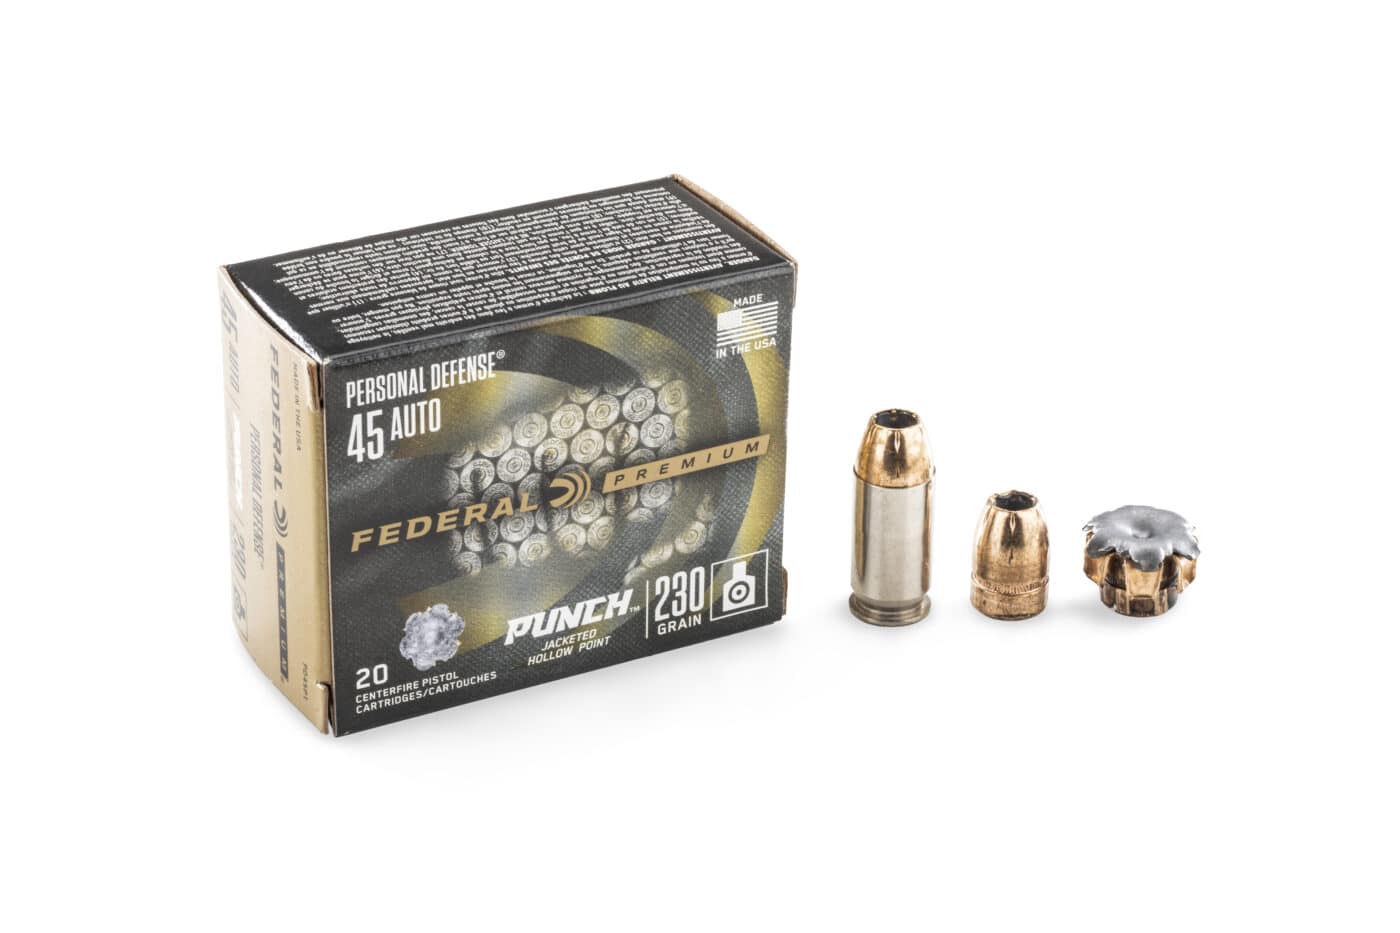 Federal Personal Defense Punch .45 ammo next to ammo box